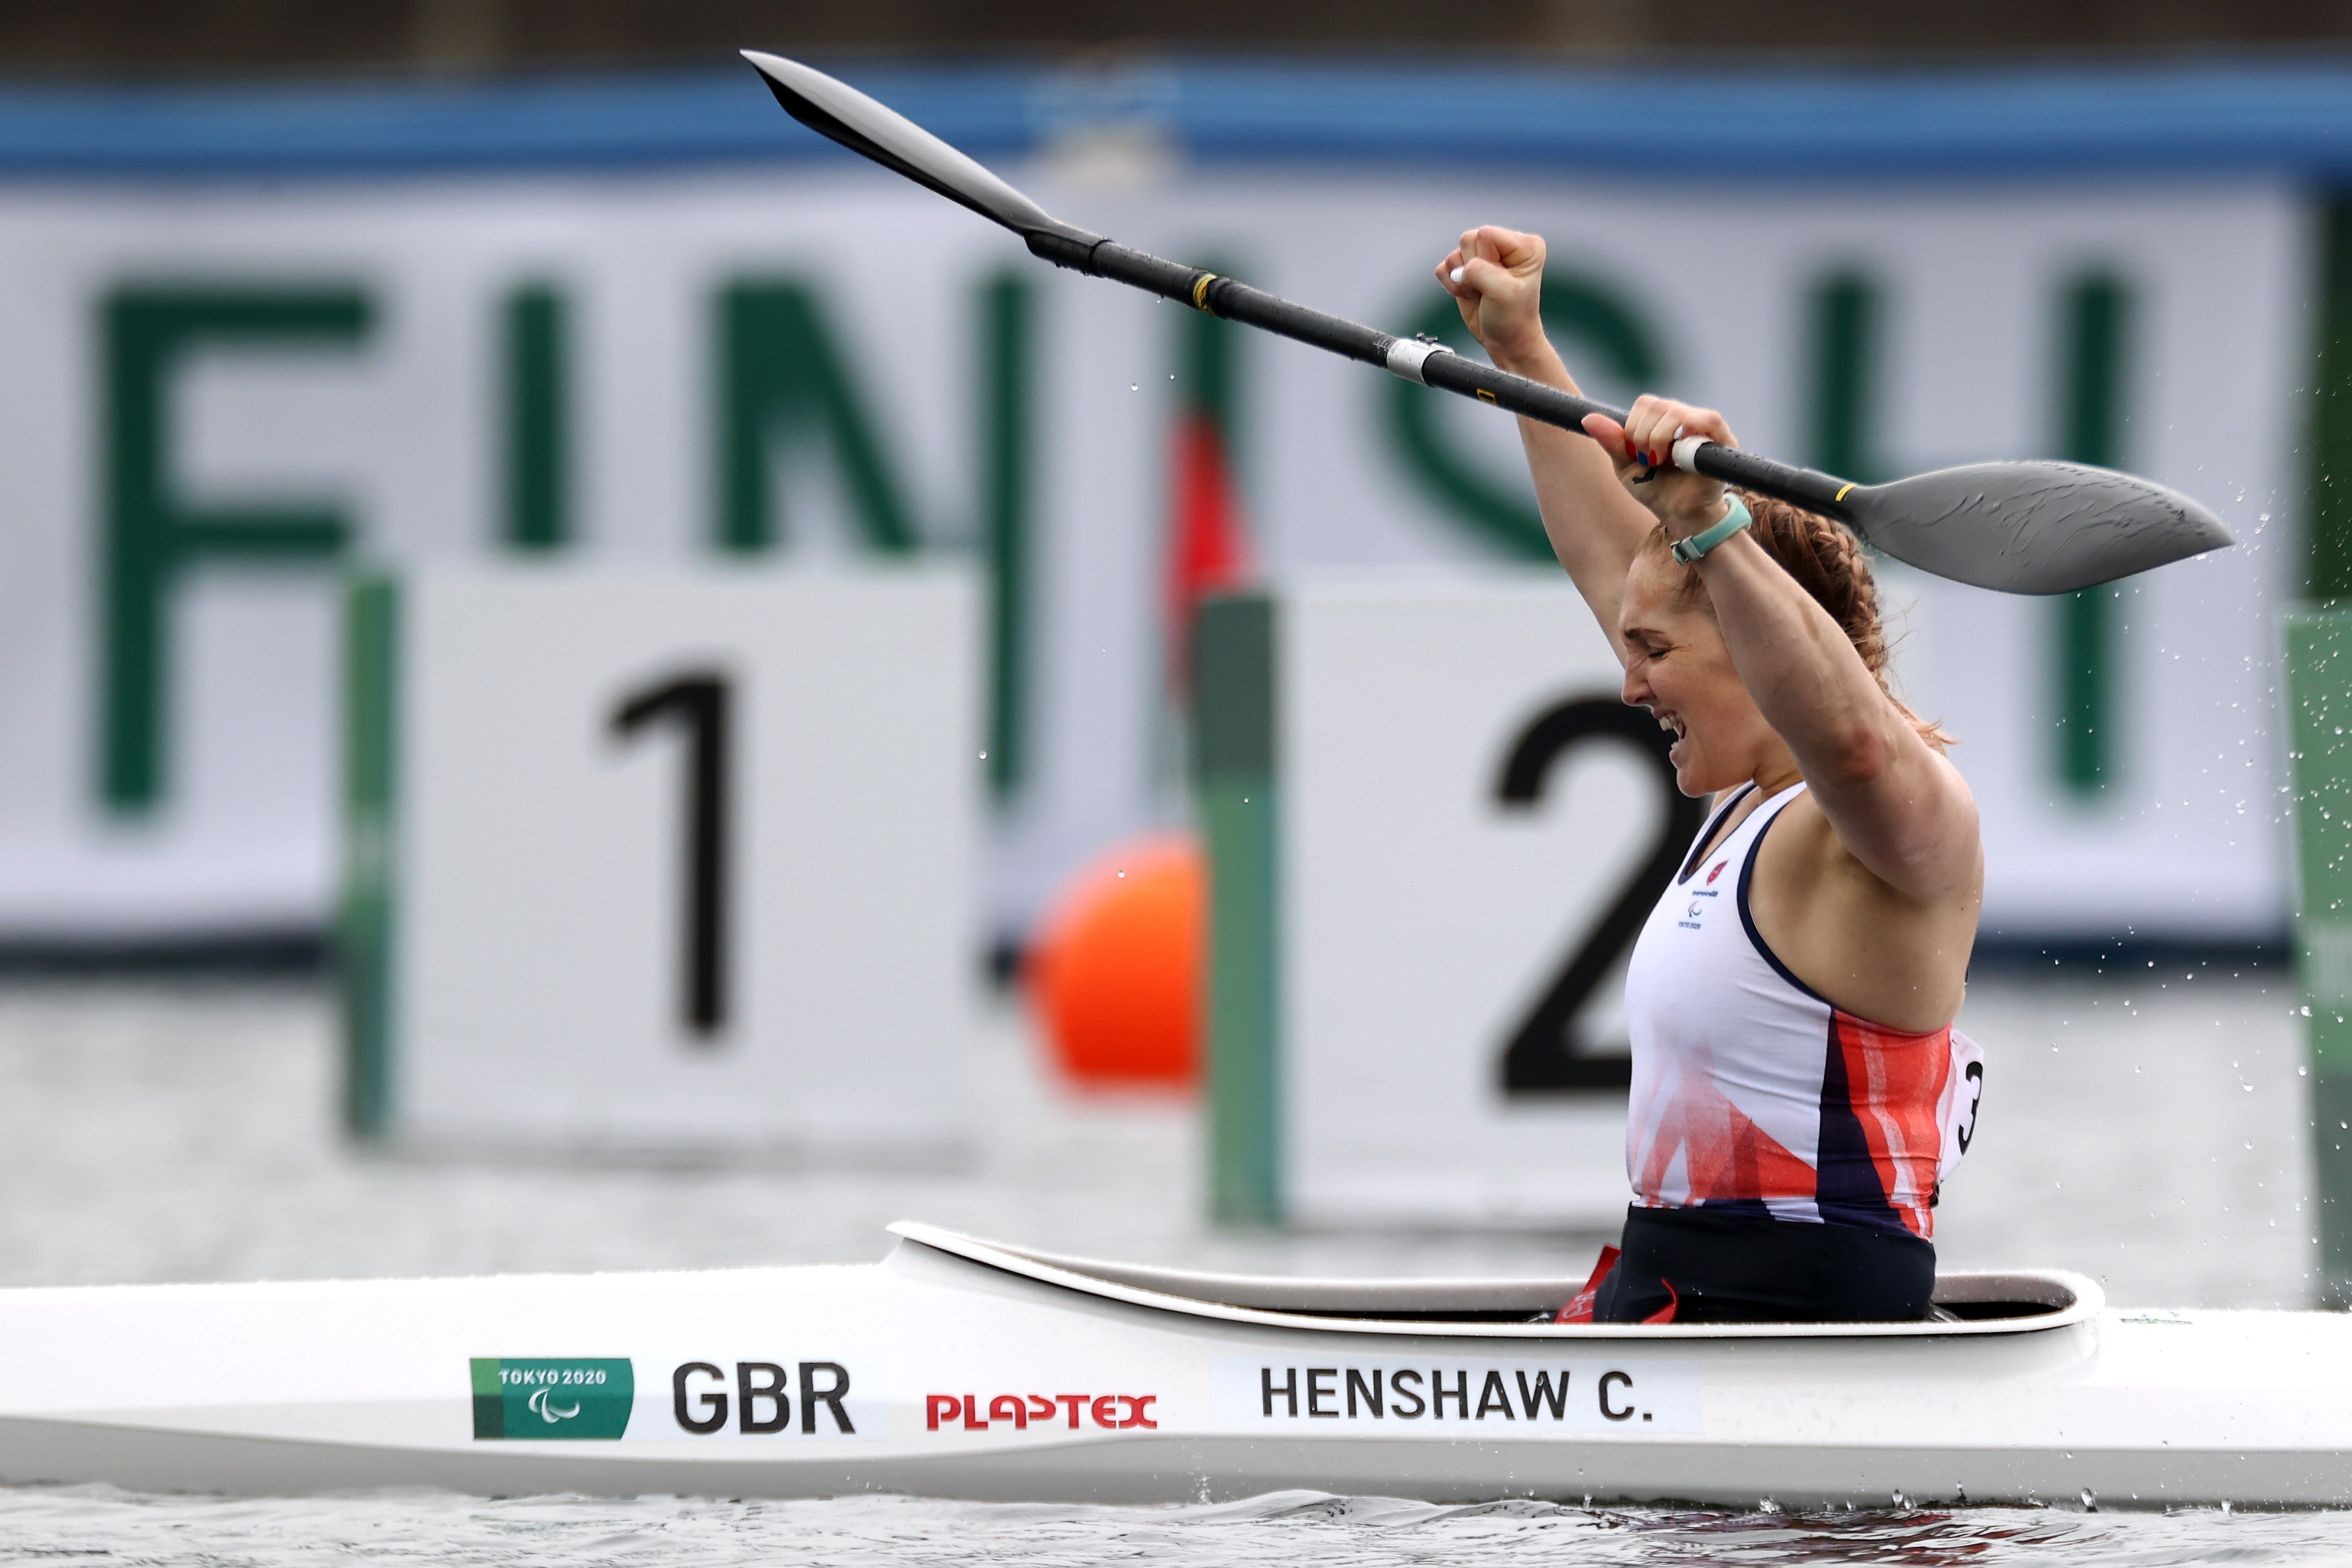 Henshaw fought her way to Paralympic gold in Tokyo